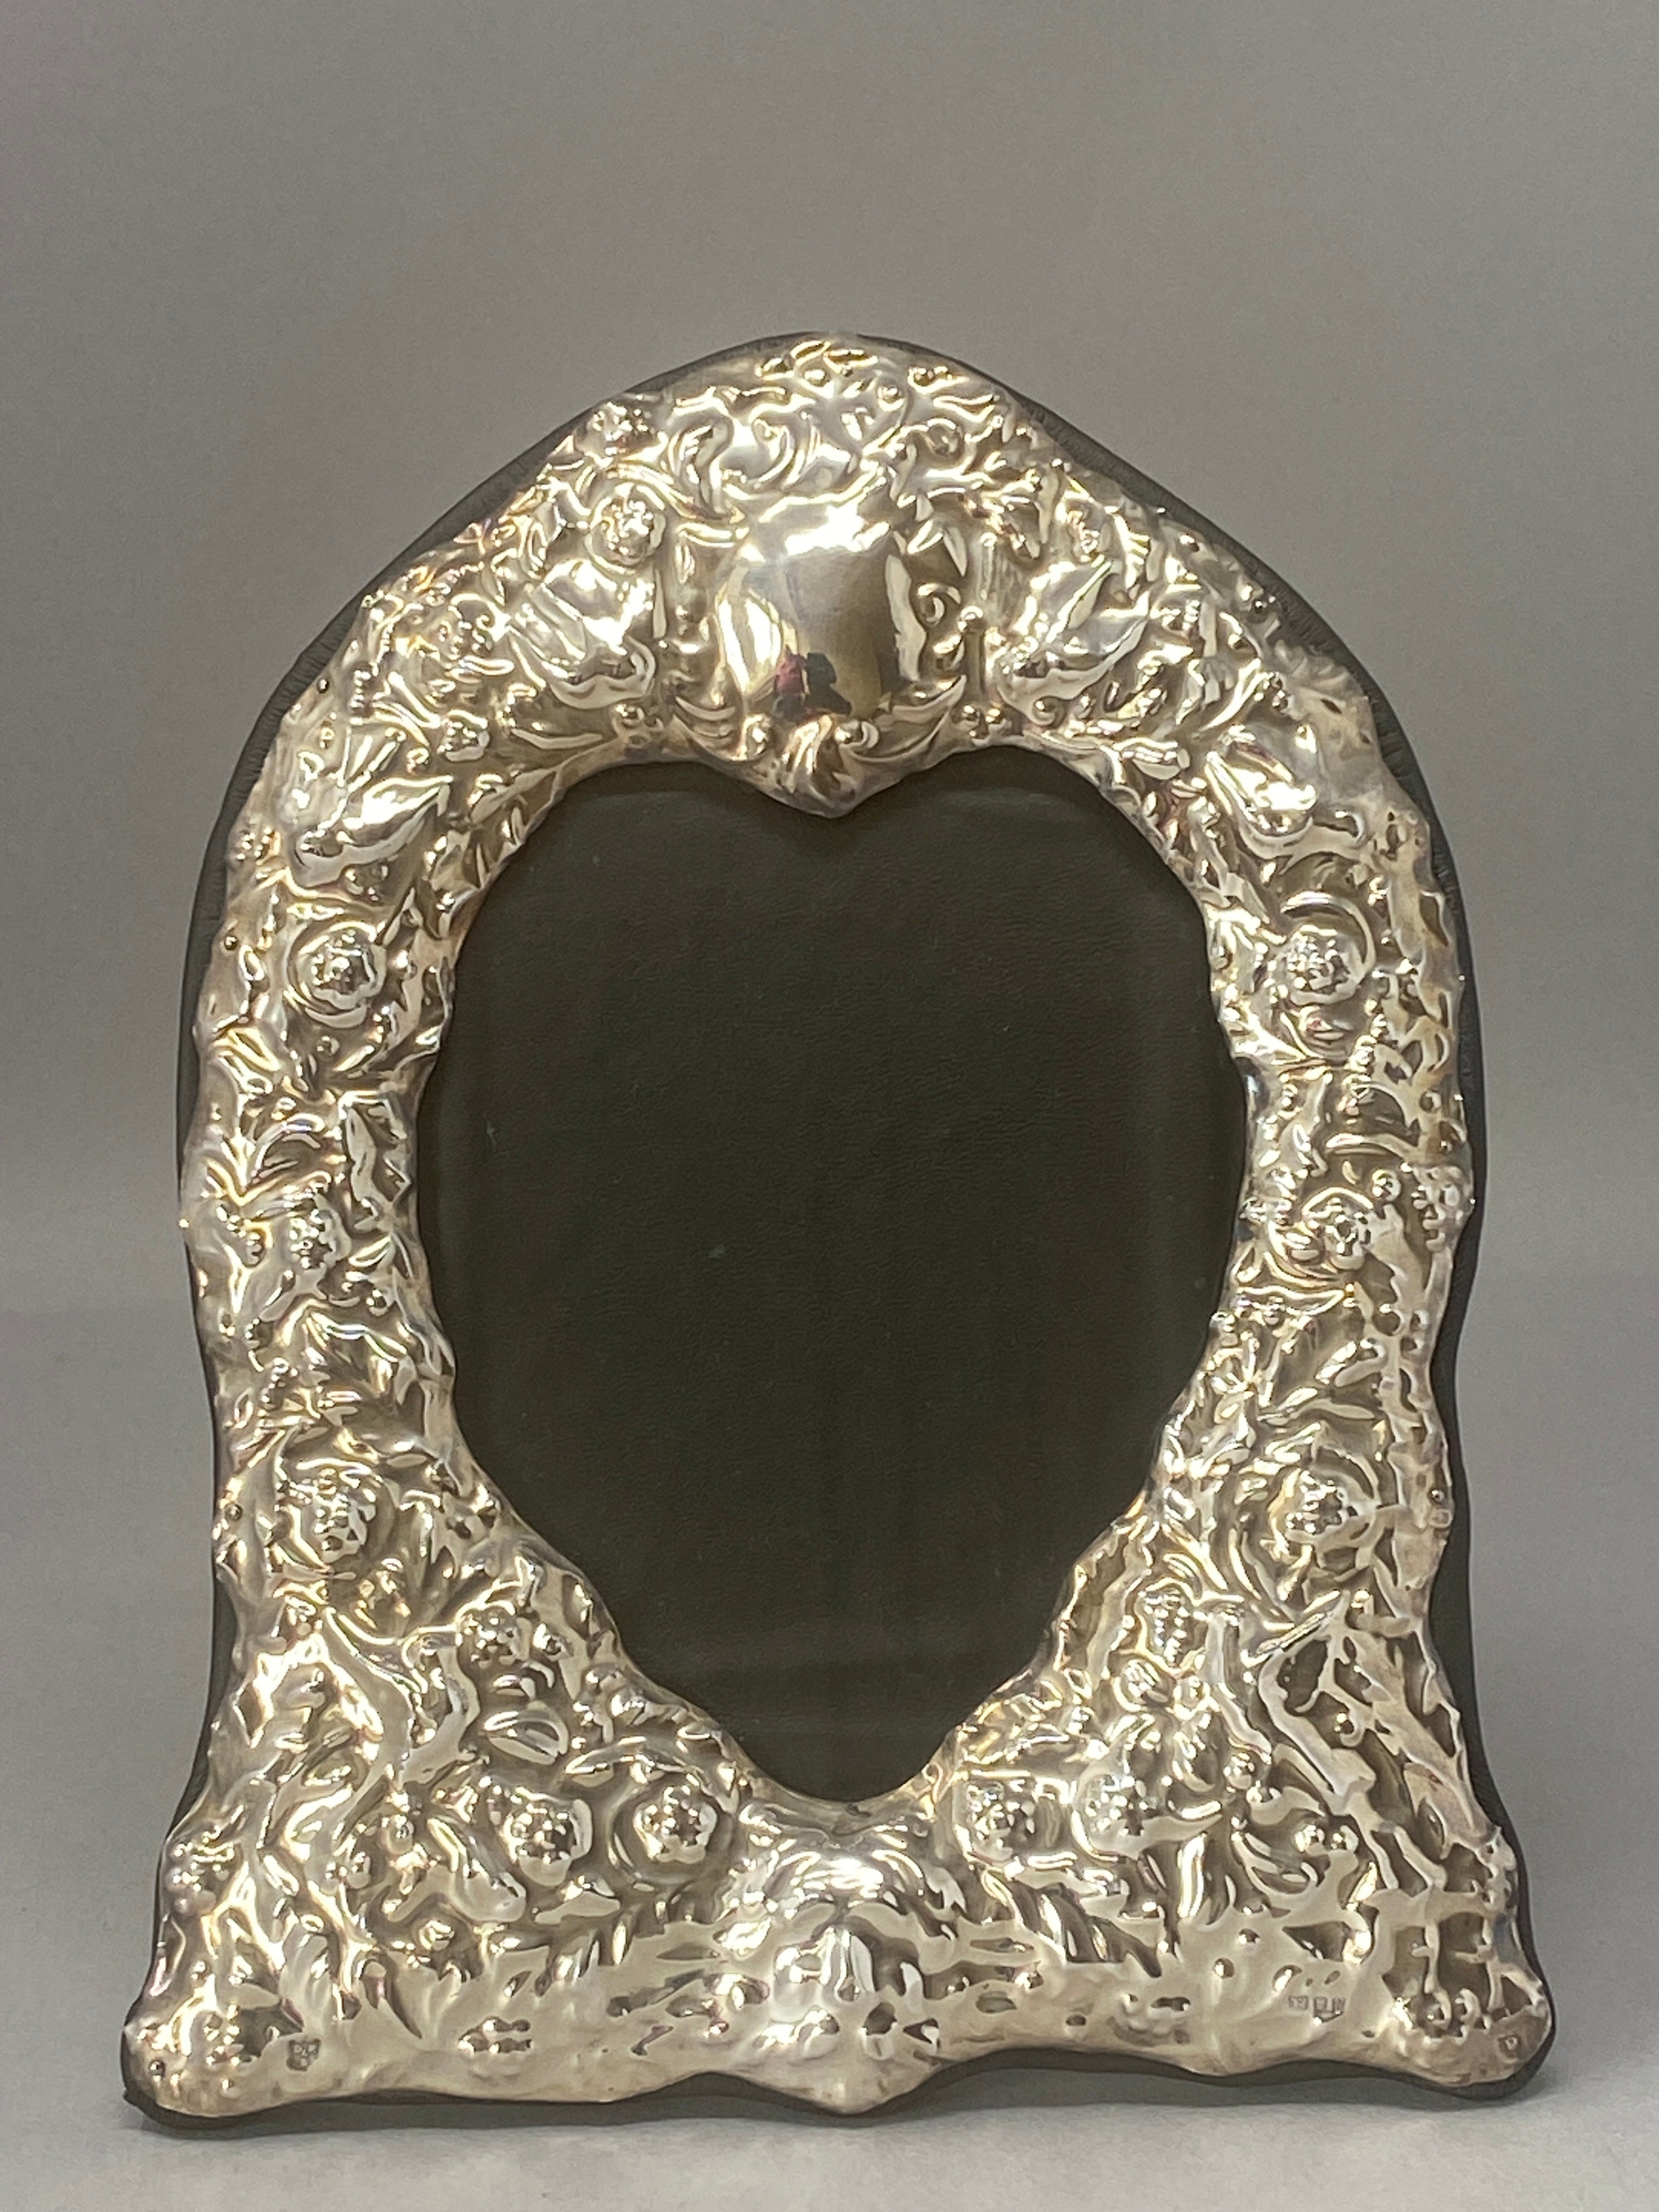 Silver Photo Frame with Traditional Antique Heart Aperture. L